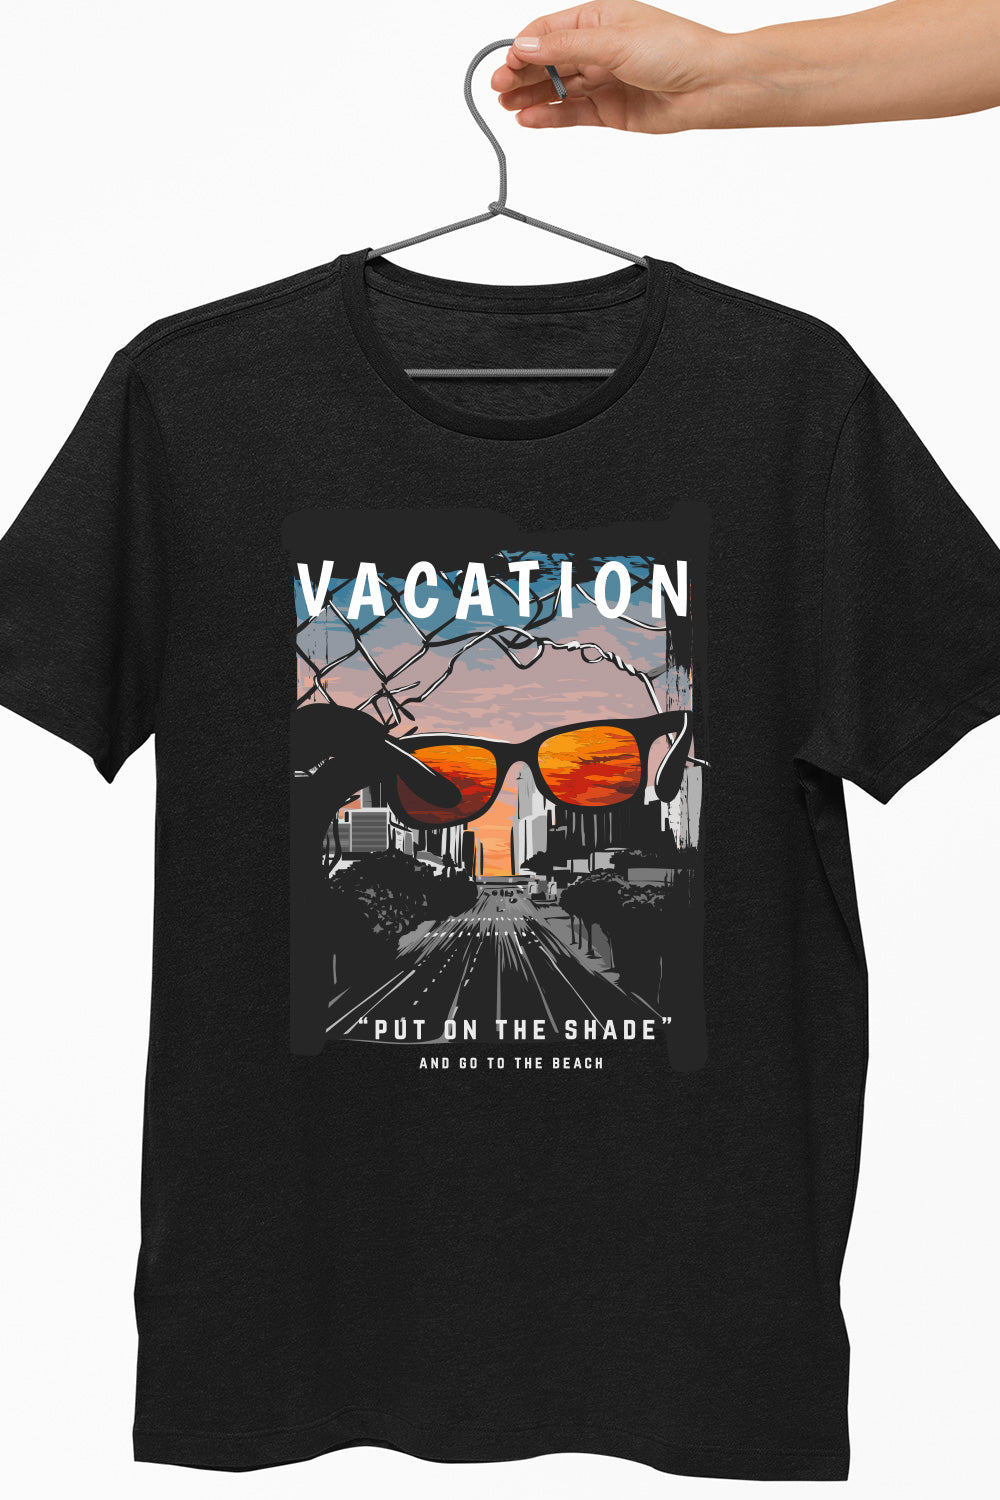 Vacation Graphic T-Shirt Black Color